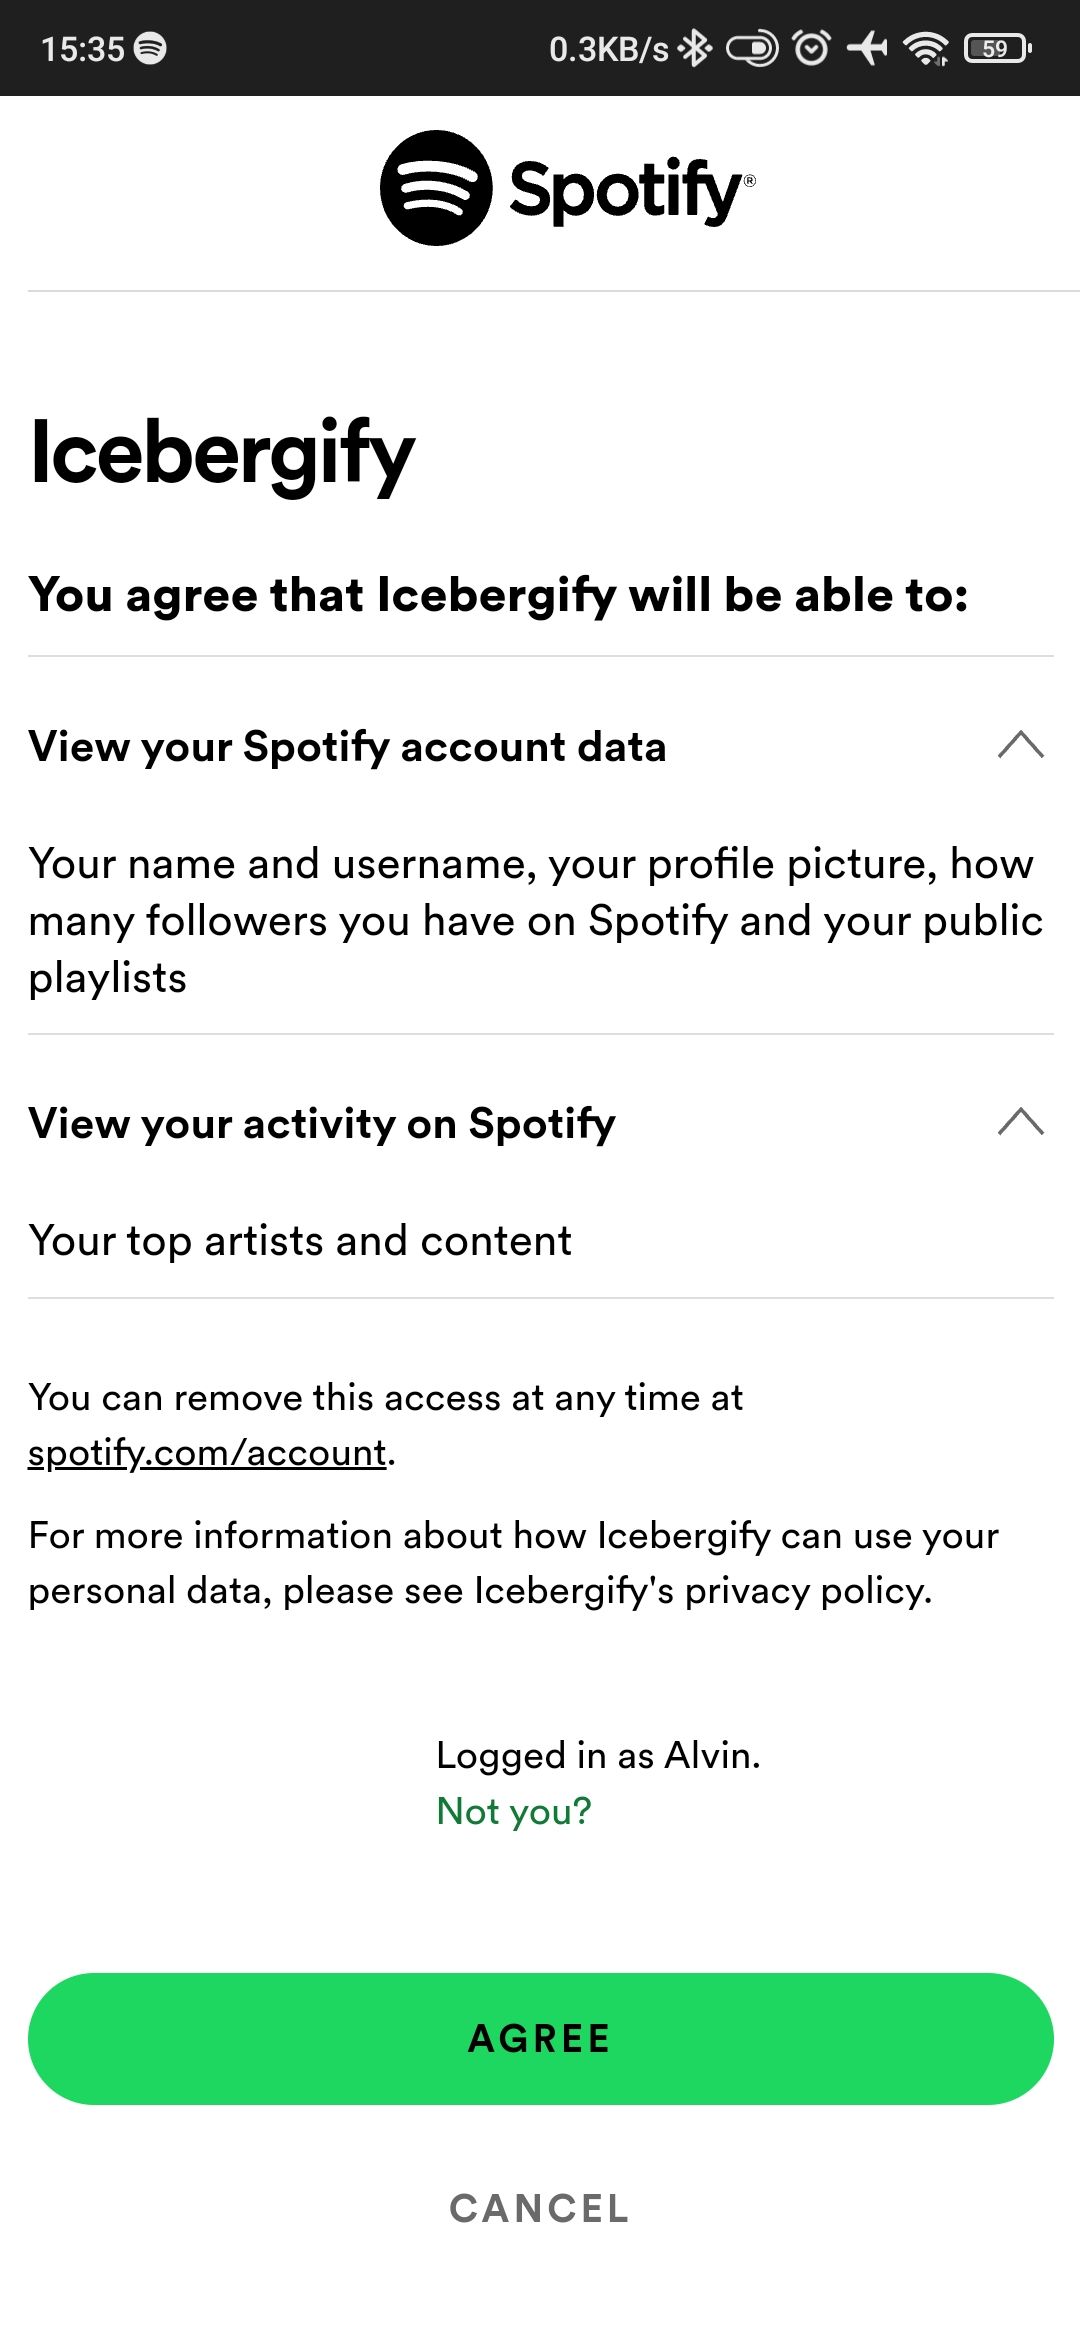 Granting Icebergify permission to view Spotify data